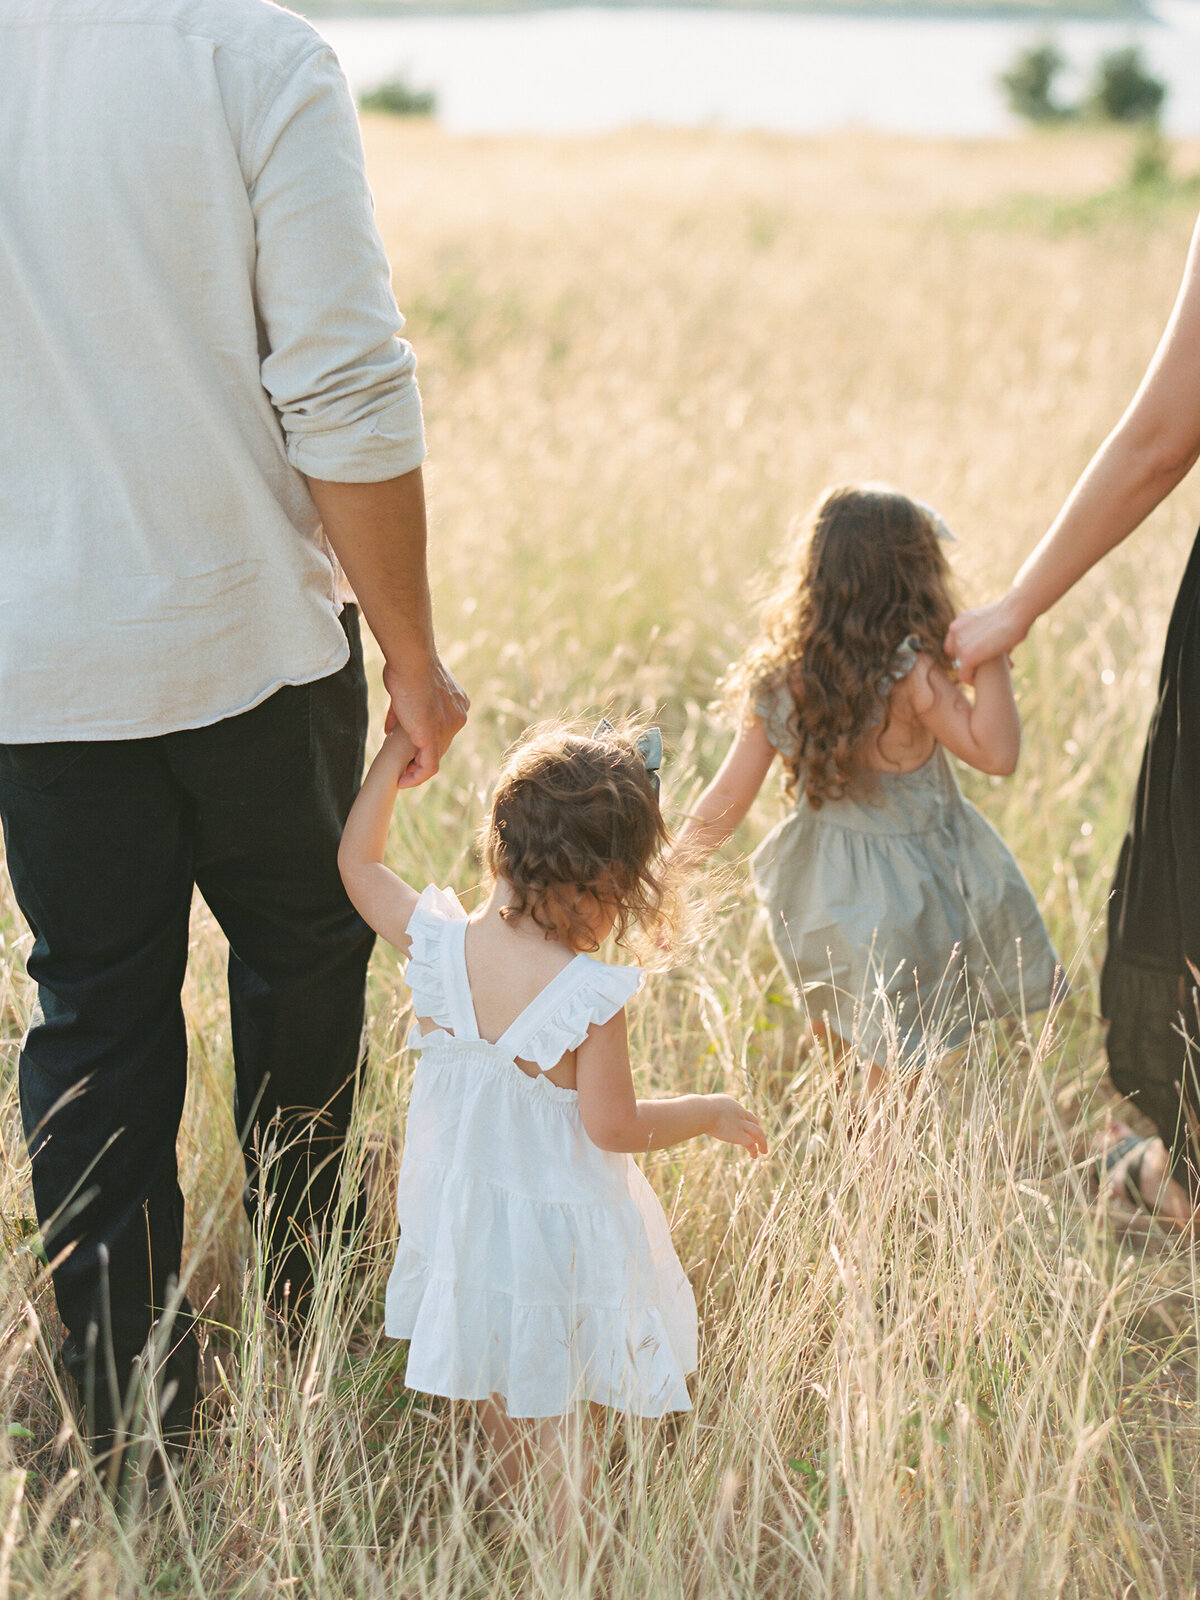 Parents and their two daughters holding hands and walking through a grassy field